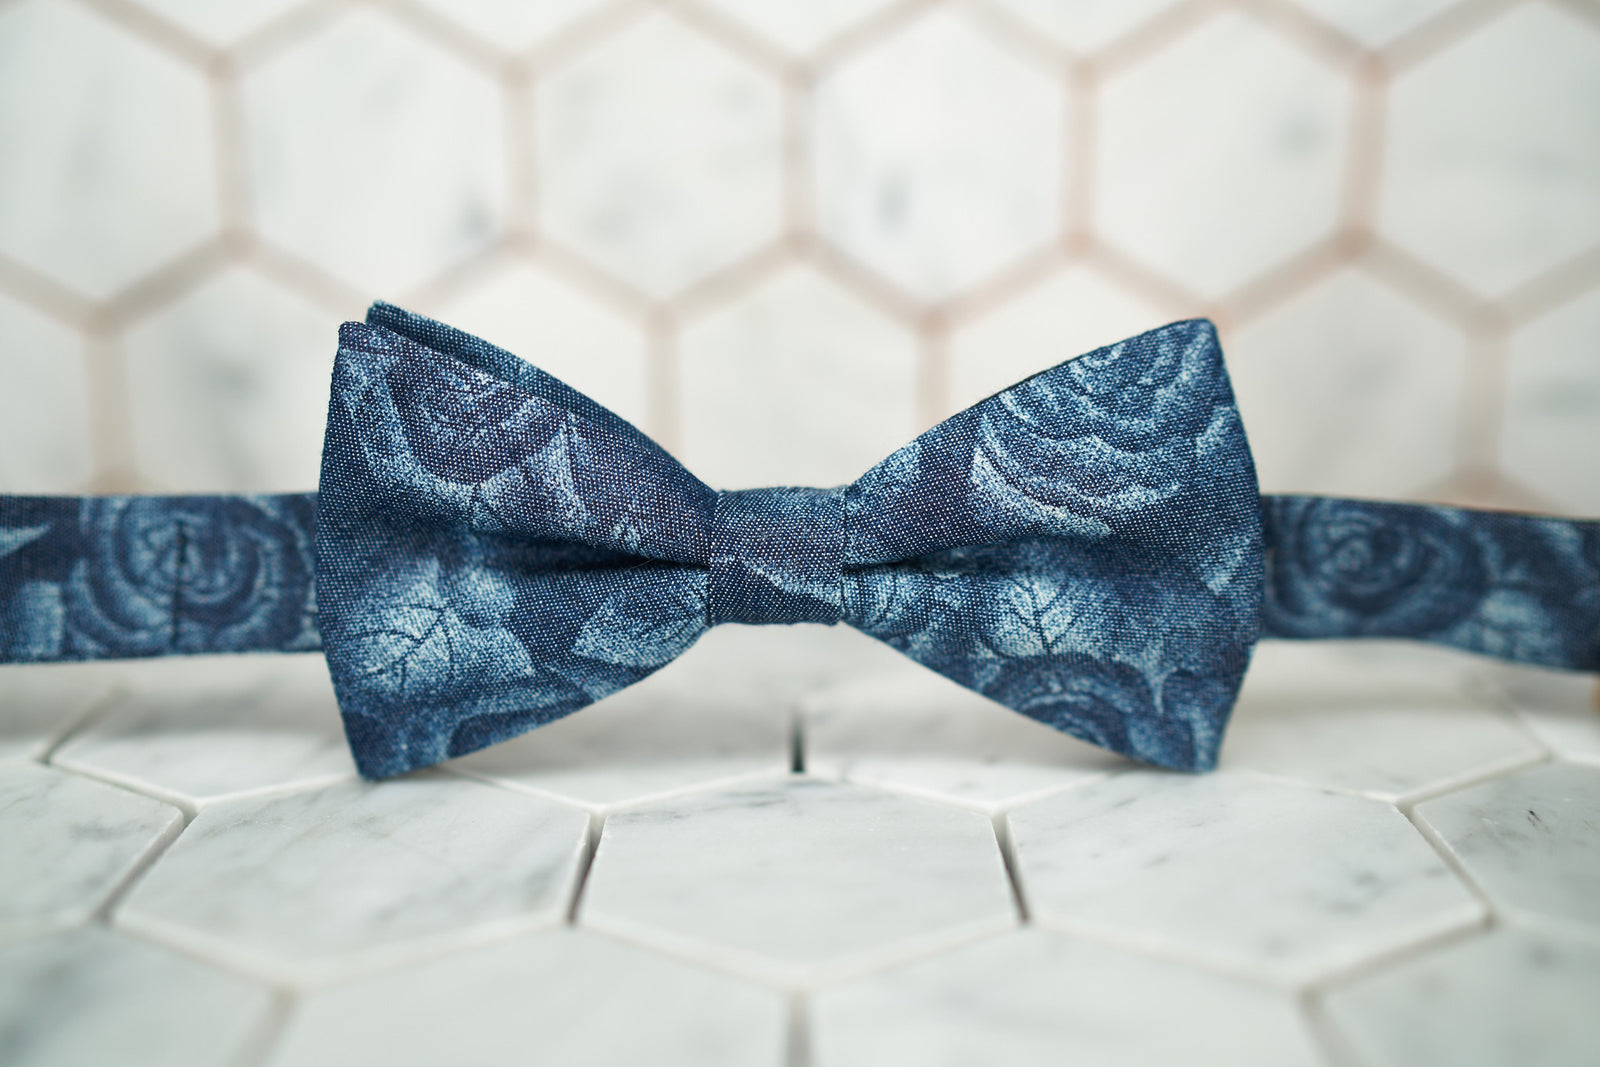 A front view of the Cranford rose denim bow tie by Dear Martian; the bow tie has light blue roses laid across its canvas.